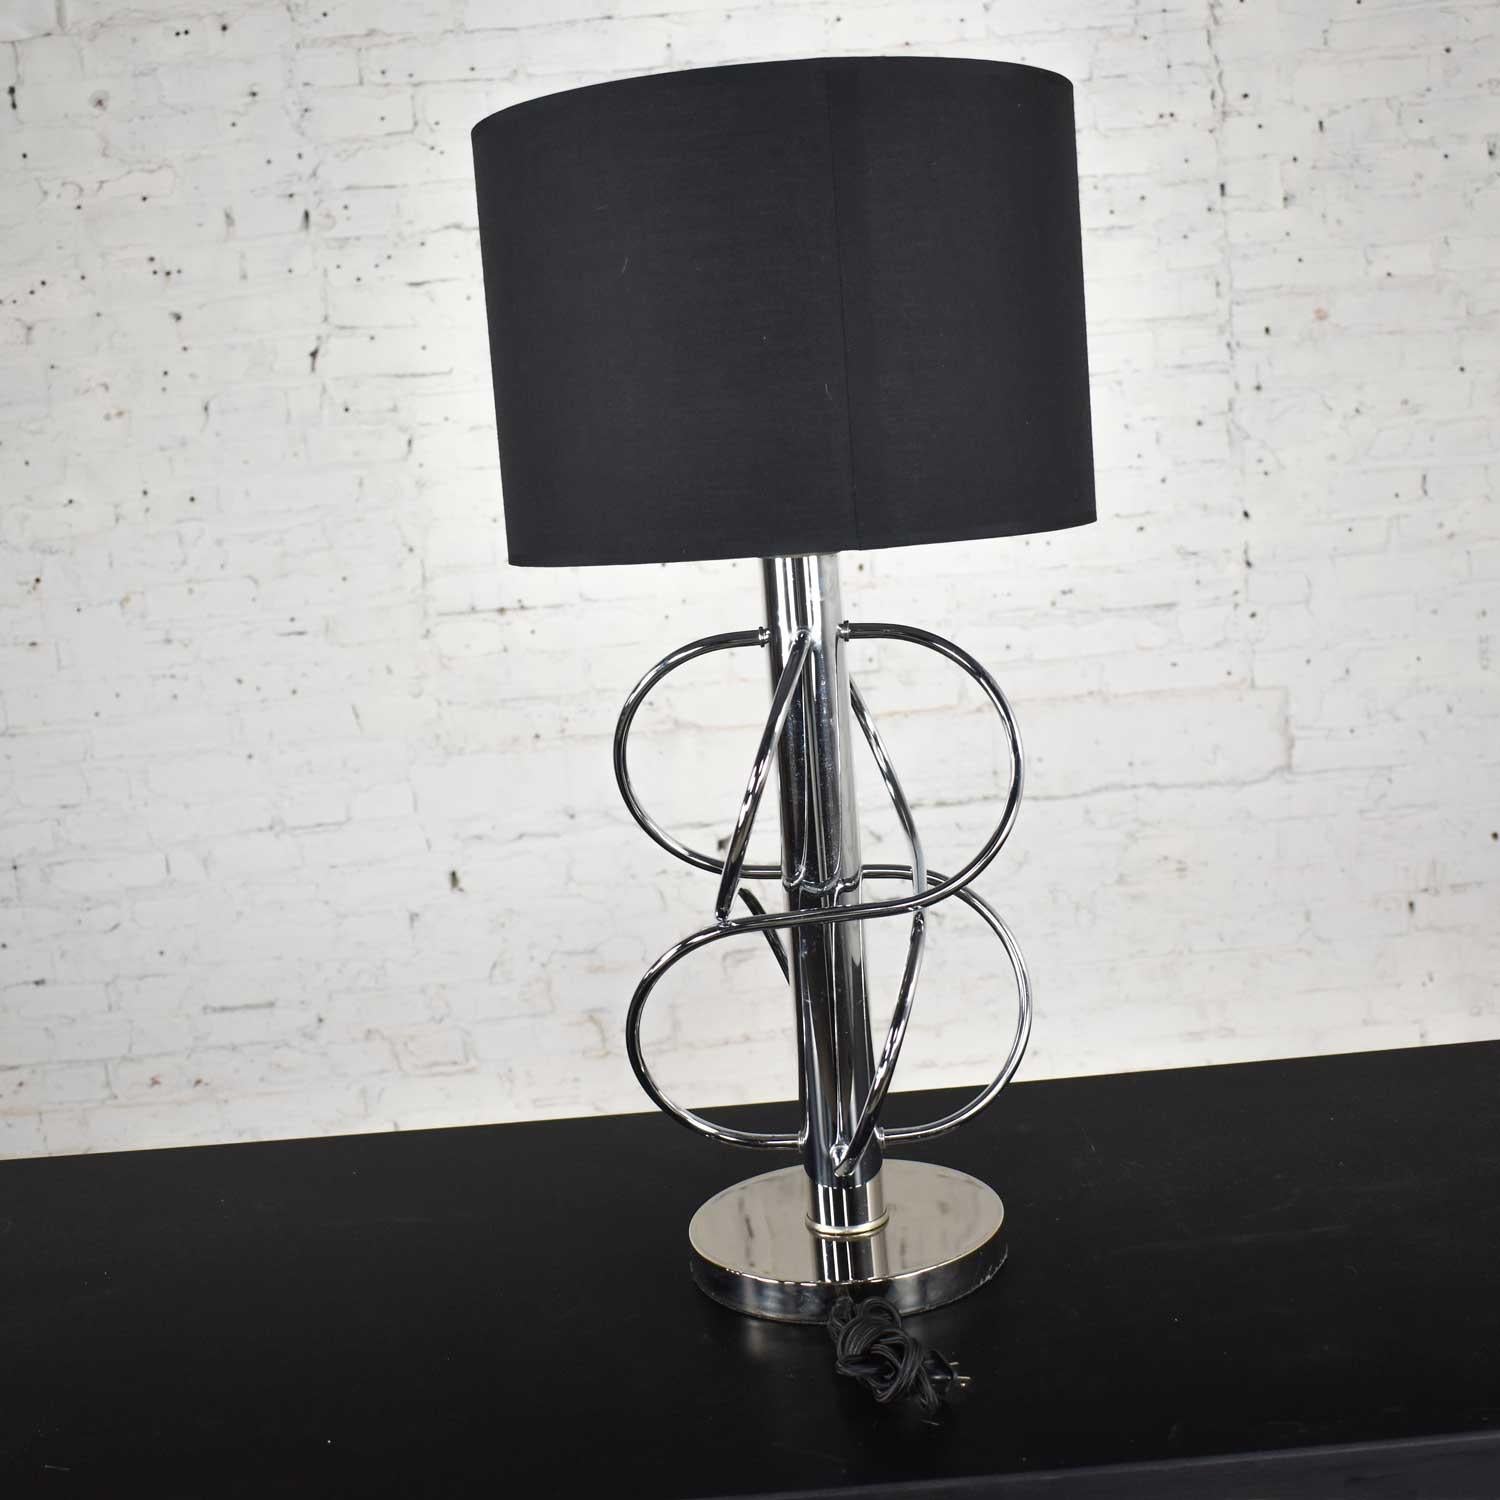 Striking vintage Mid-Century Modern polished chrome table lamp with new black Fenchel drum shade. Wonderful condition although there is a tiny ding in the shaft and age-appropriate wear as you would expect with a vintage piece. Please see photos.